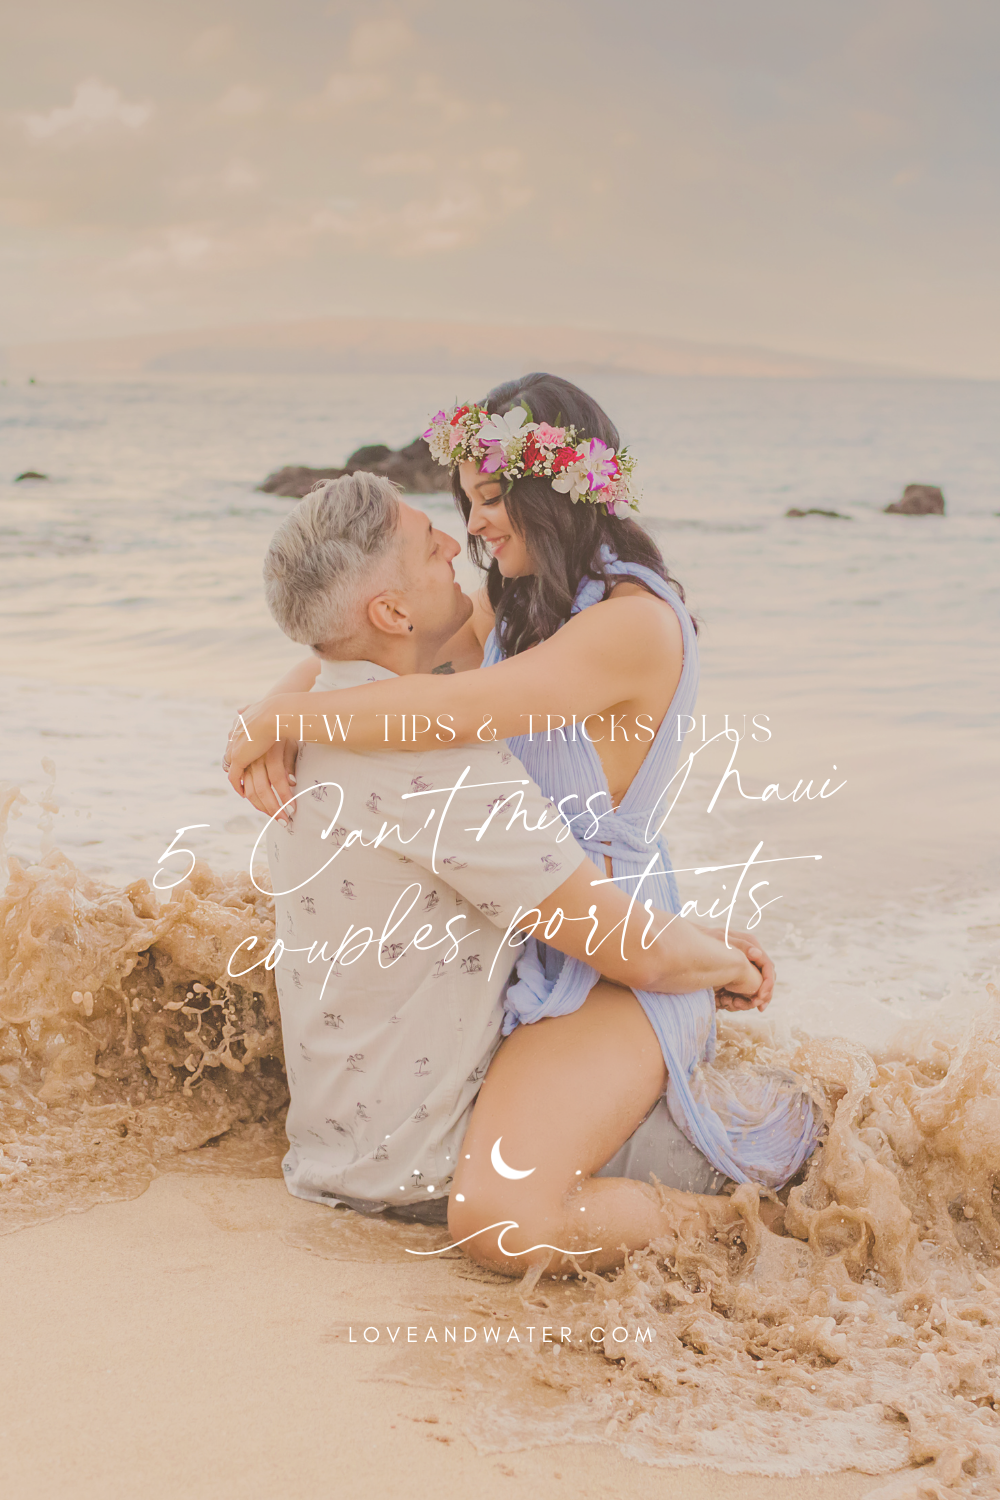 5 can't-miss Maui couples portraits and tips and tricks to enjoy your session